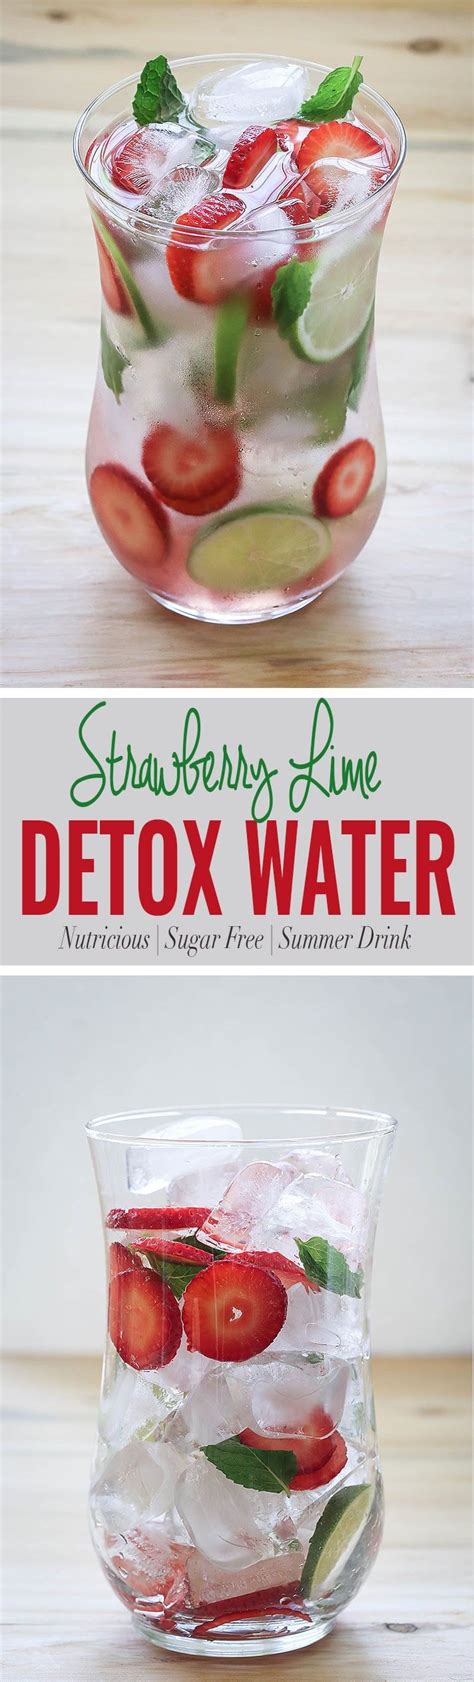 Spring Cleansing Strawberry Detox Water Recipe Strawberry Detox